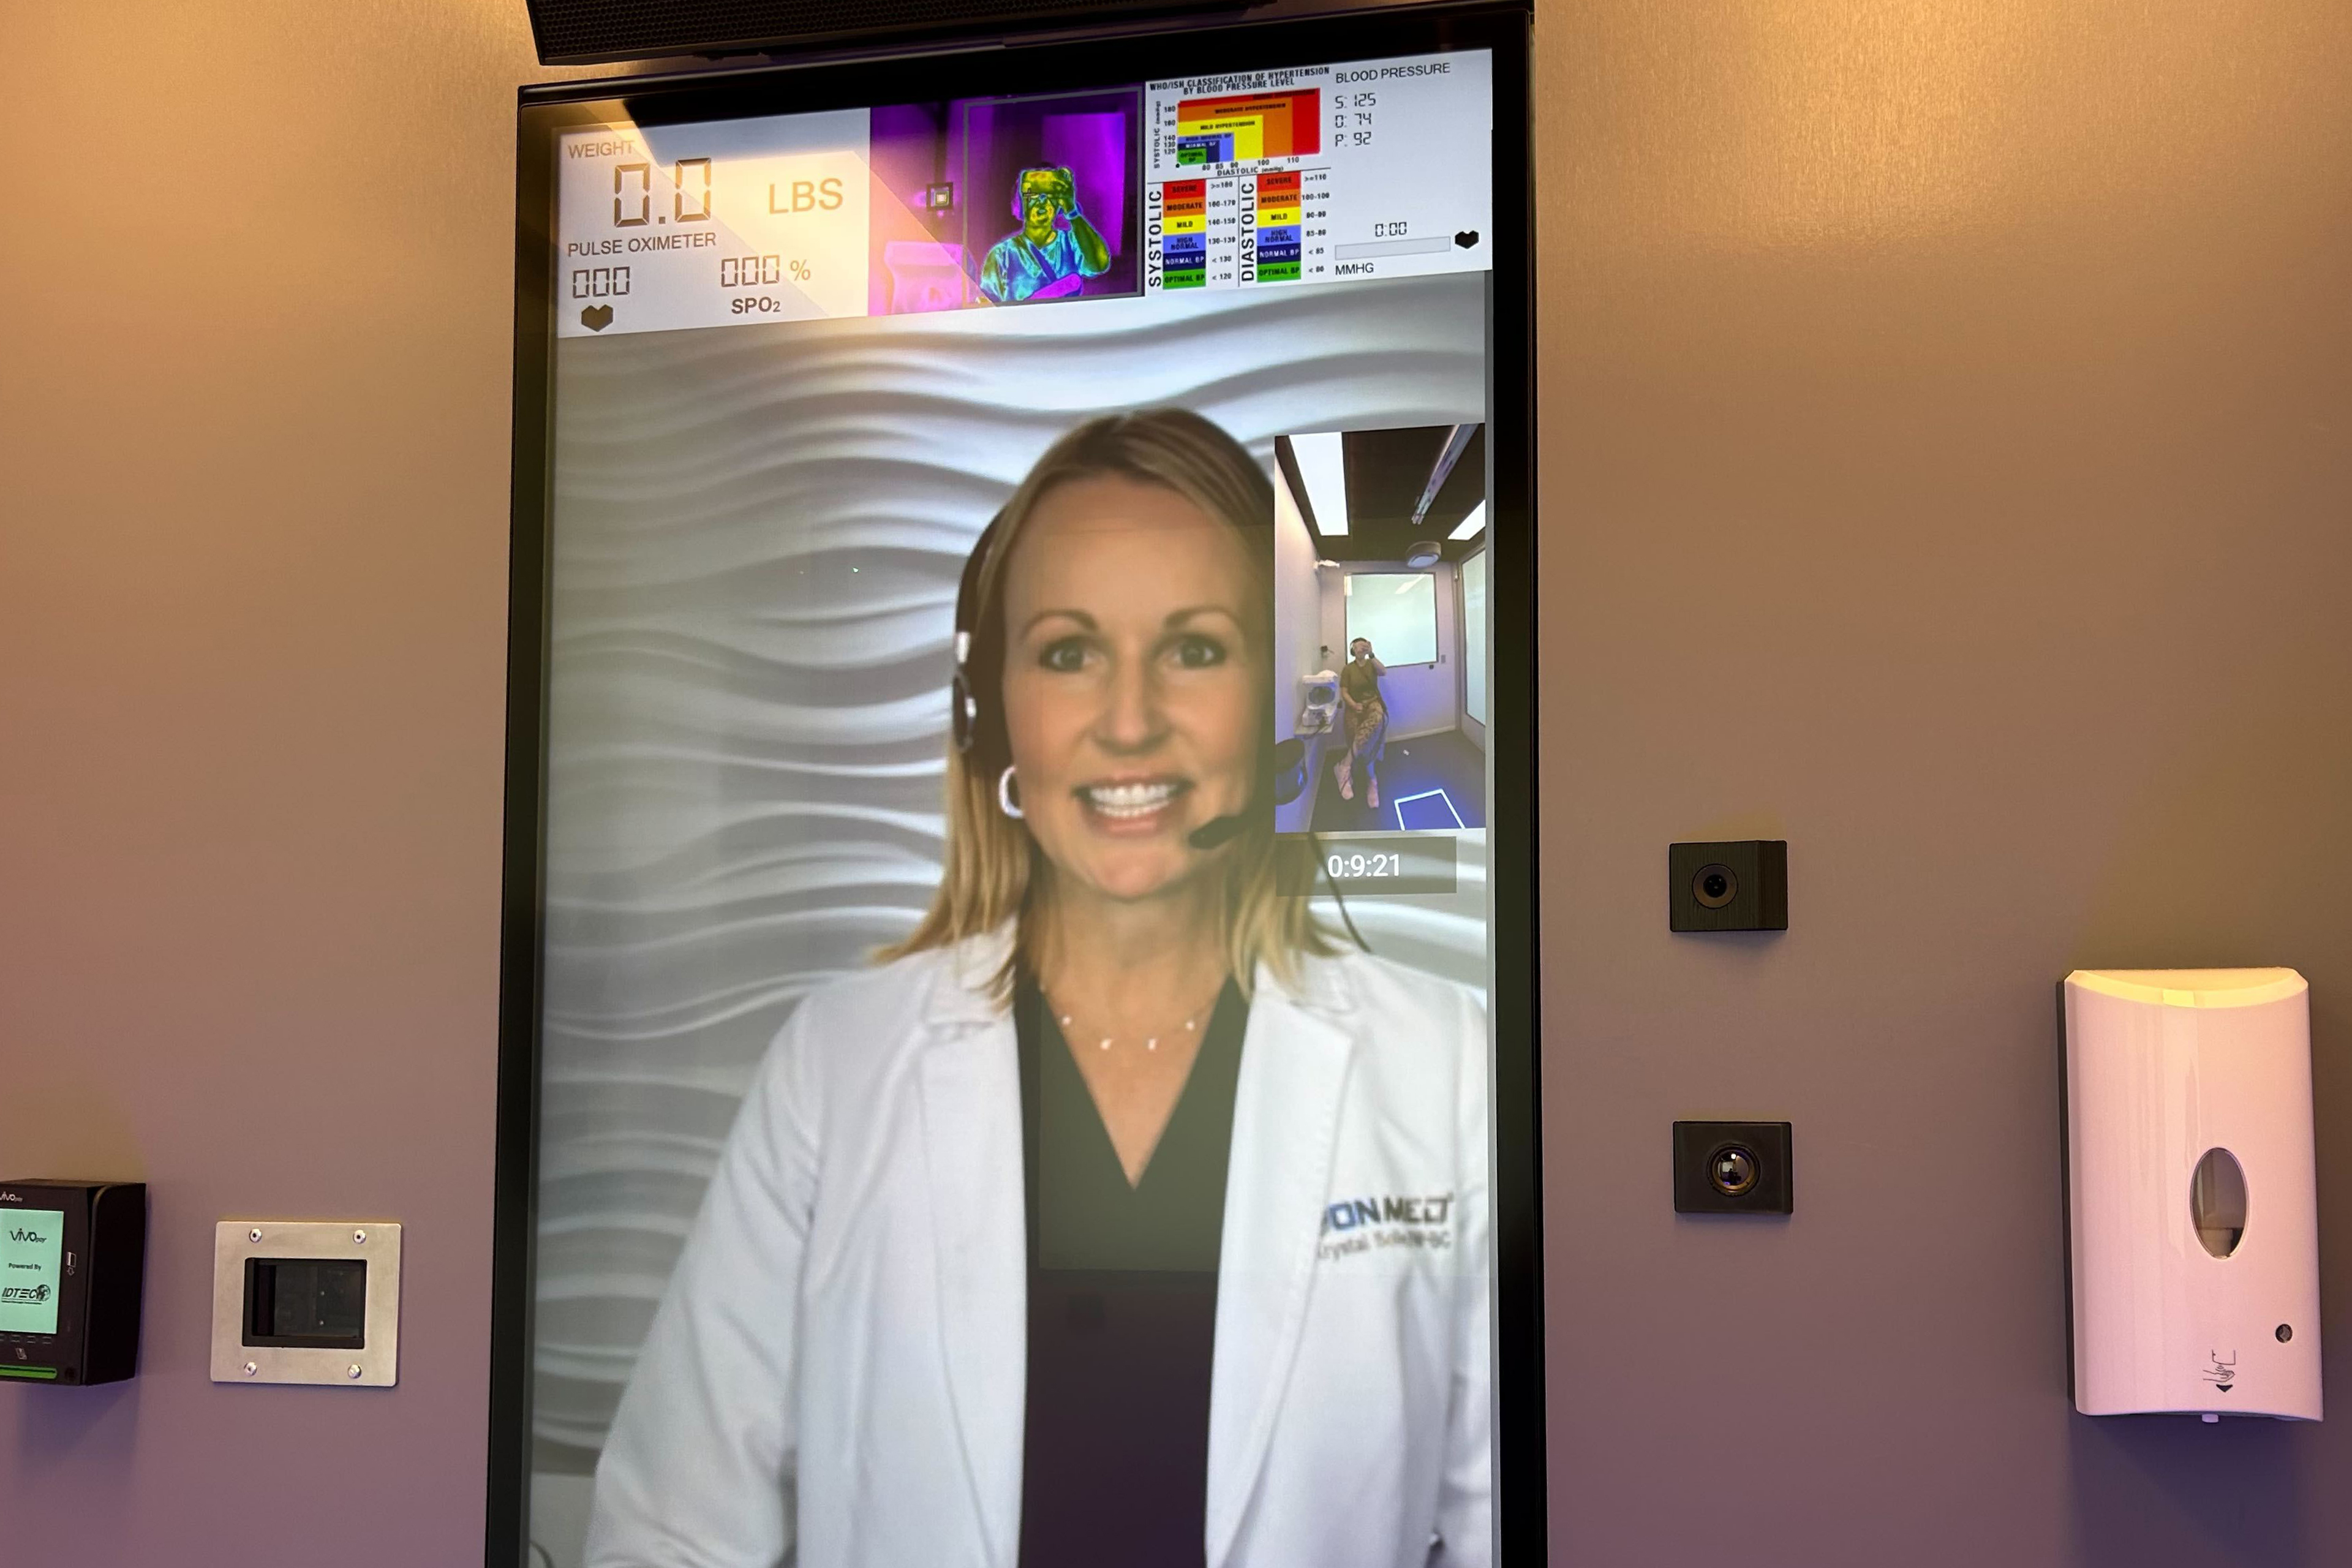 A photo of a medical worker appearing on a large screen via video call.